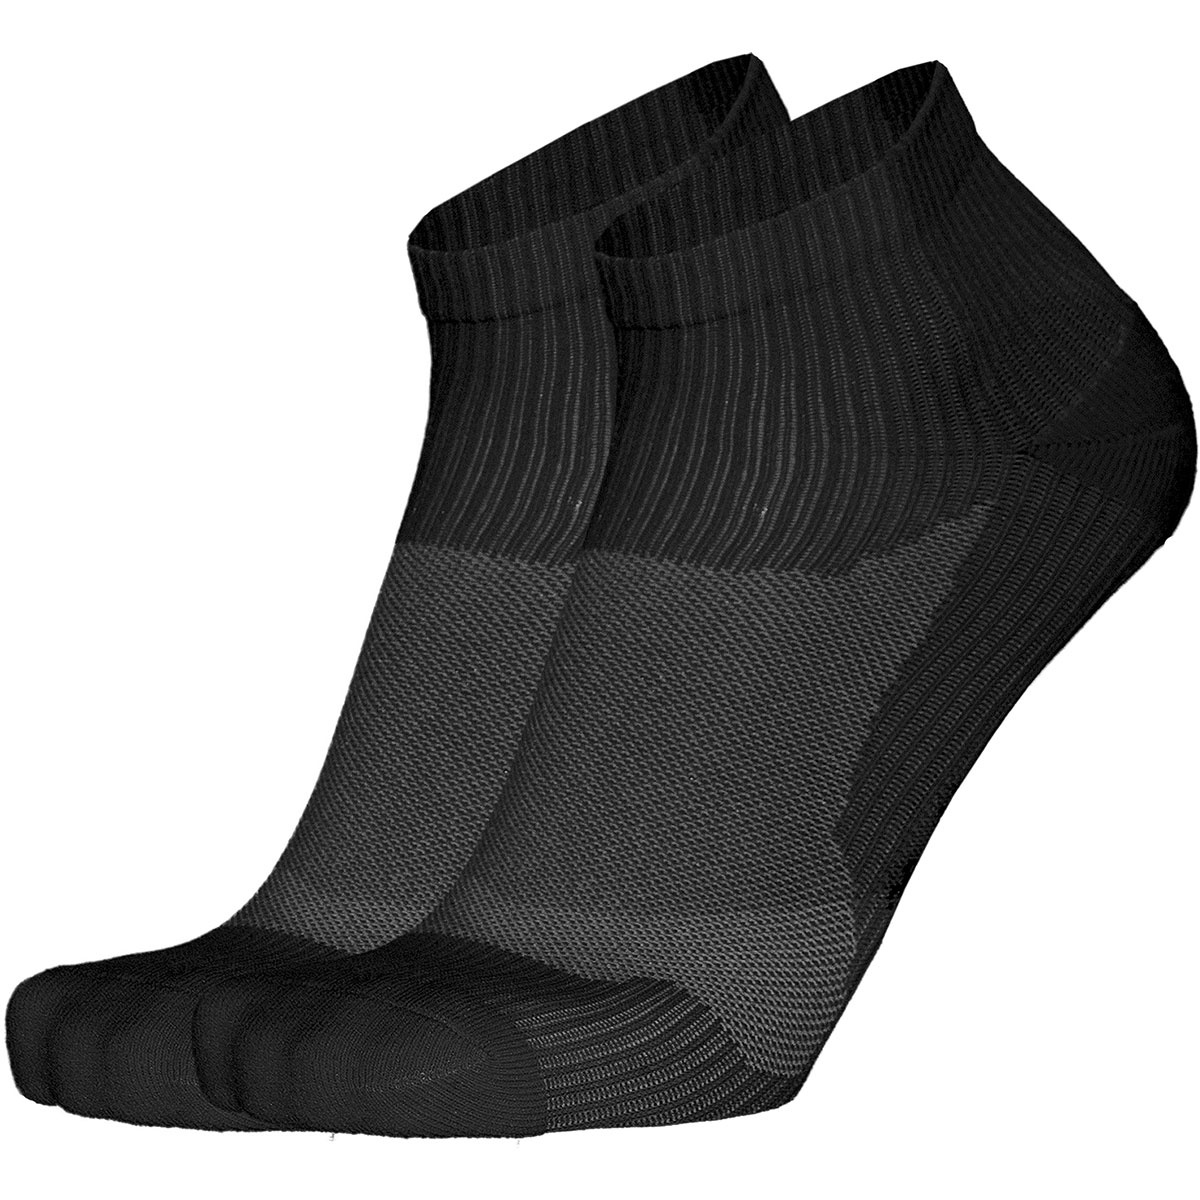 Areco 2er Pack Funktionslaufsocken von Areco